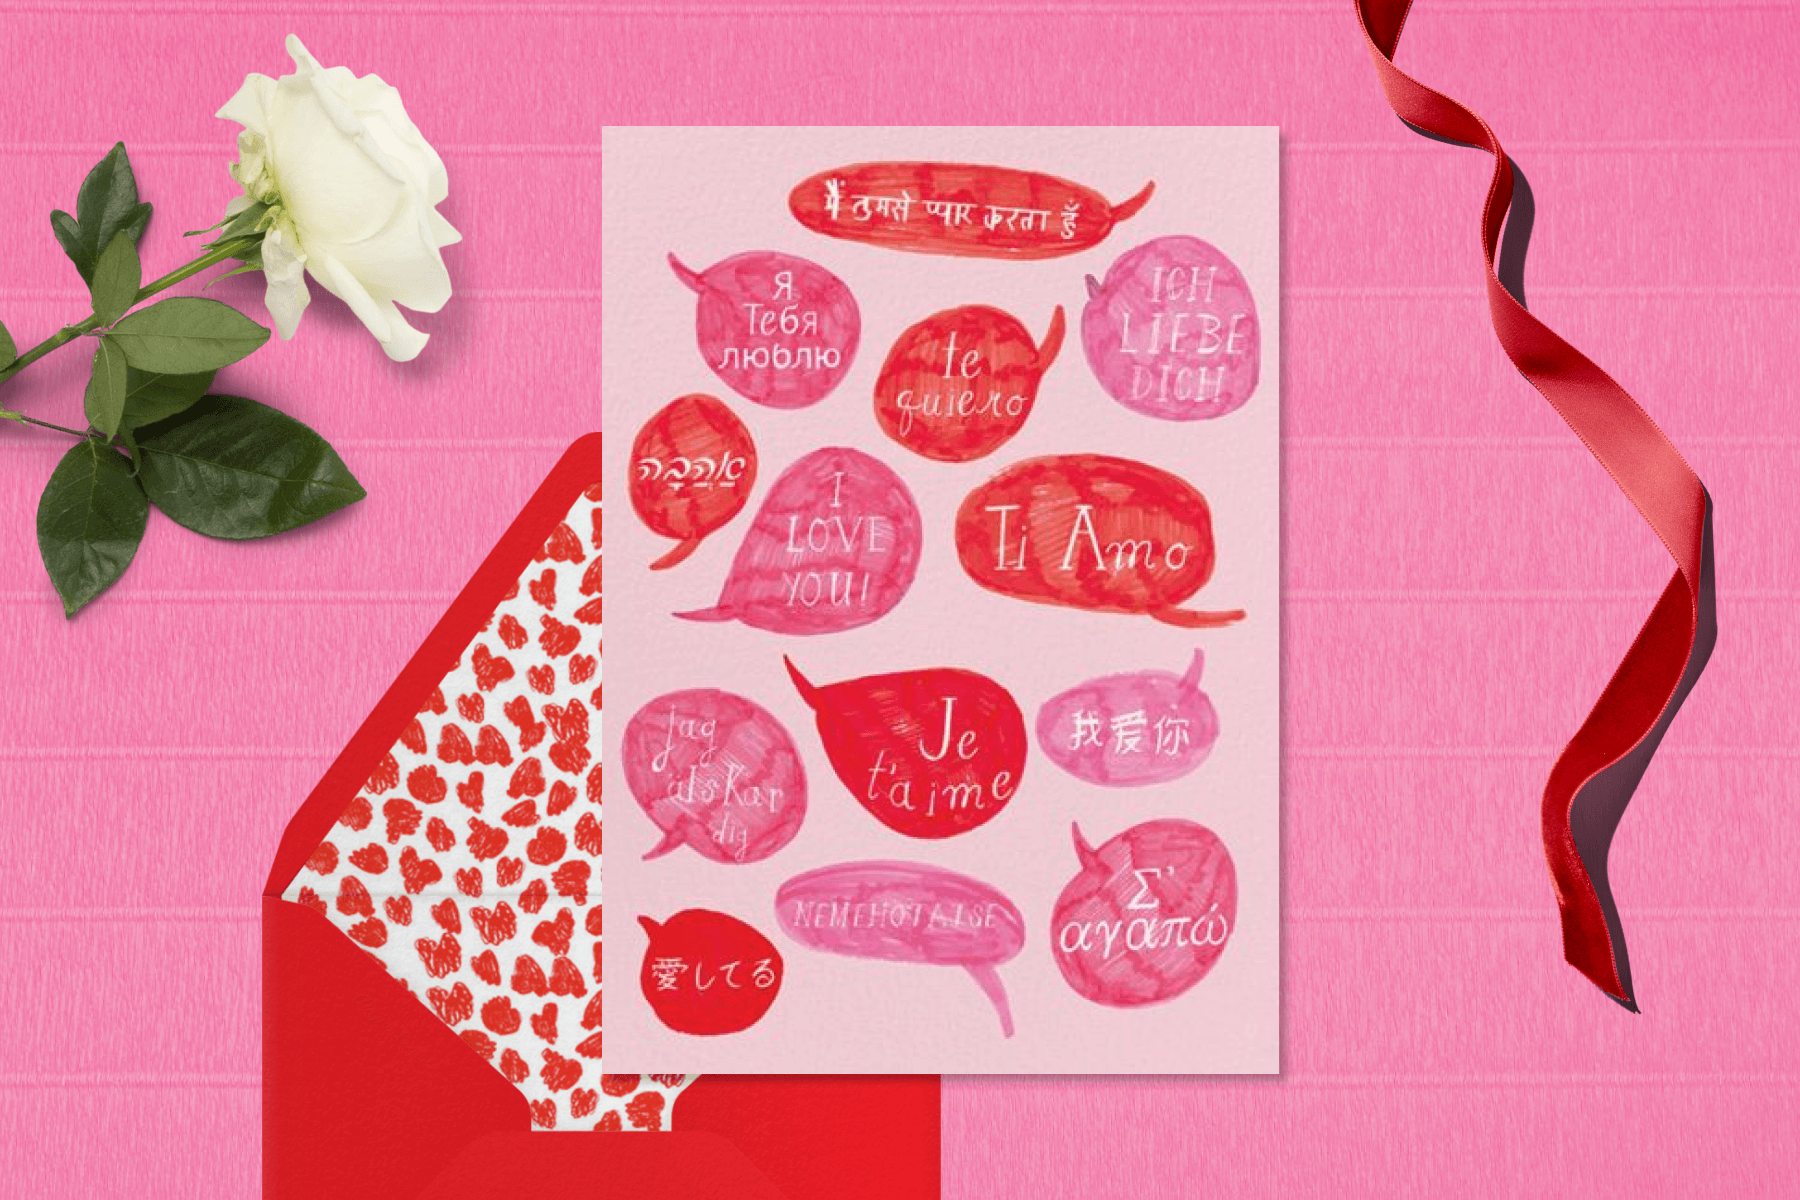 100 Valentine's Day Card Messages and Quotes for Loved Ones